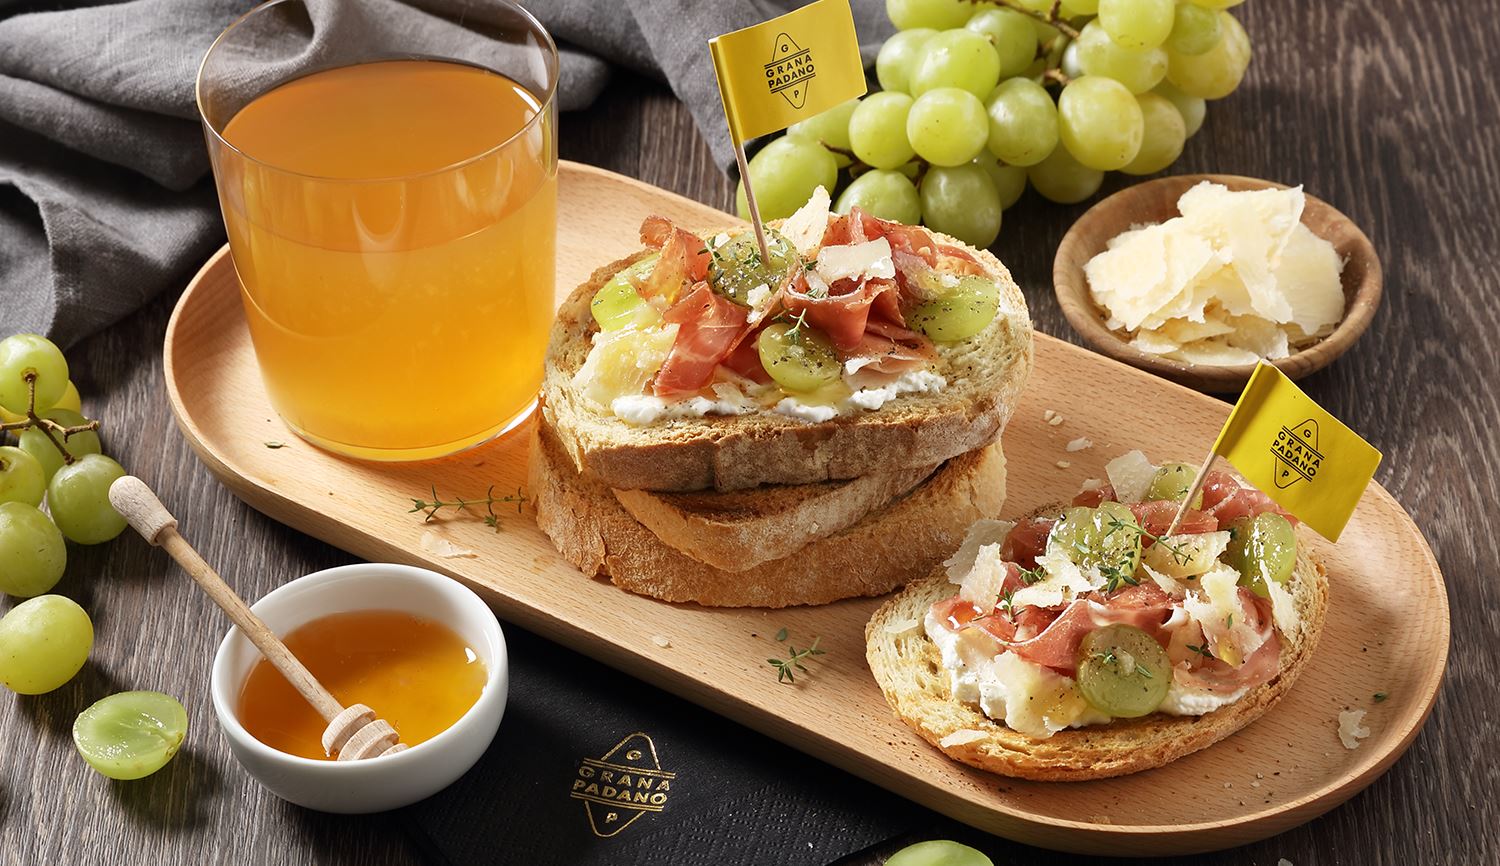 Apple Cider served with Canapes of Homestyle Bread served with White Grapes, Prosciutto, Honey and Shavings of Grana Padano